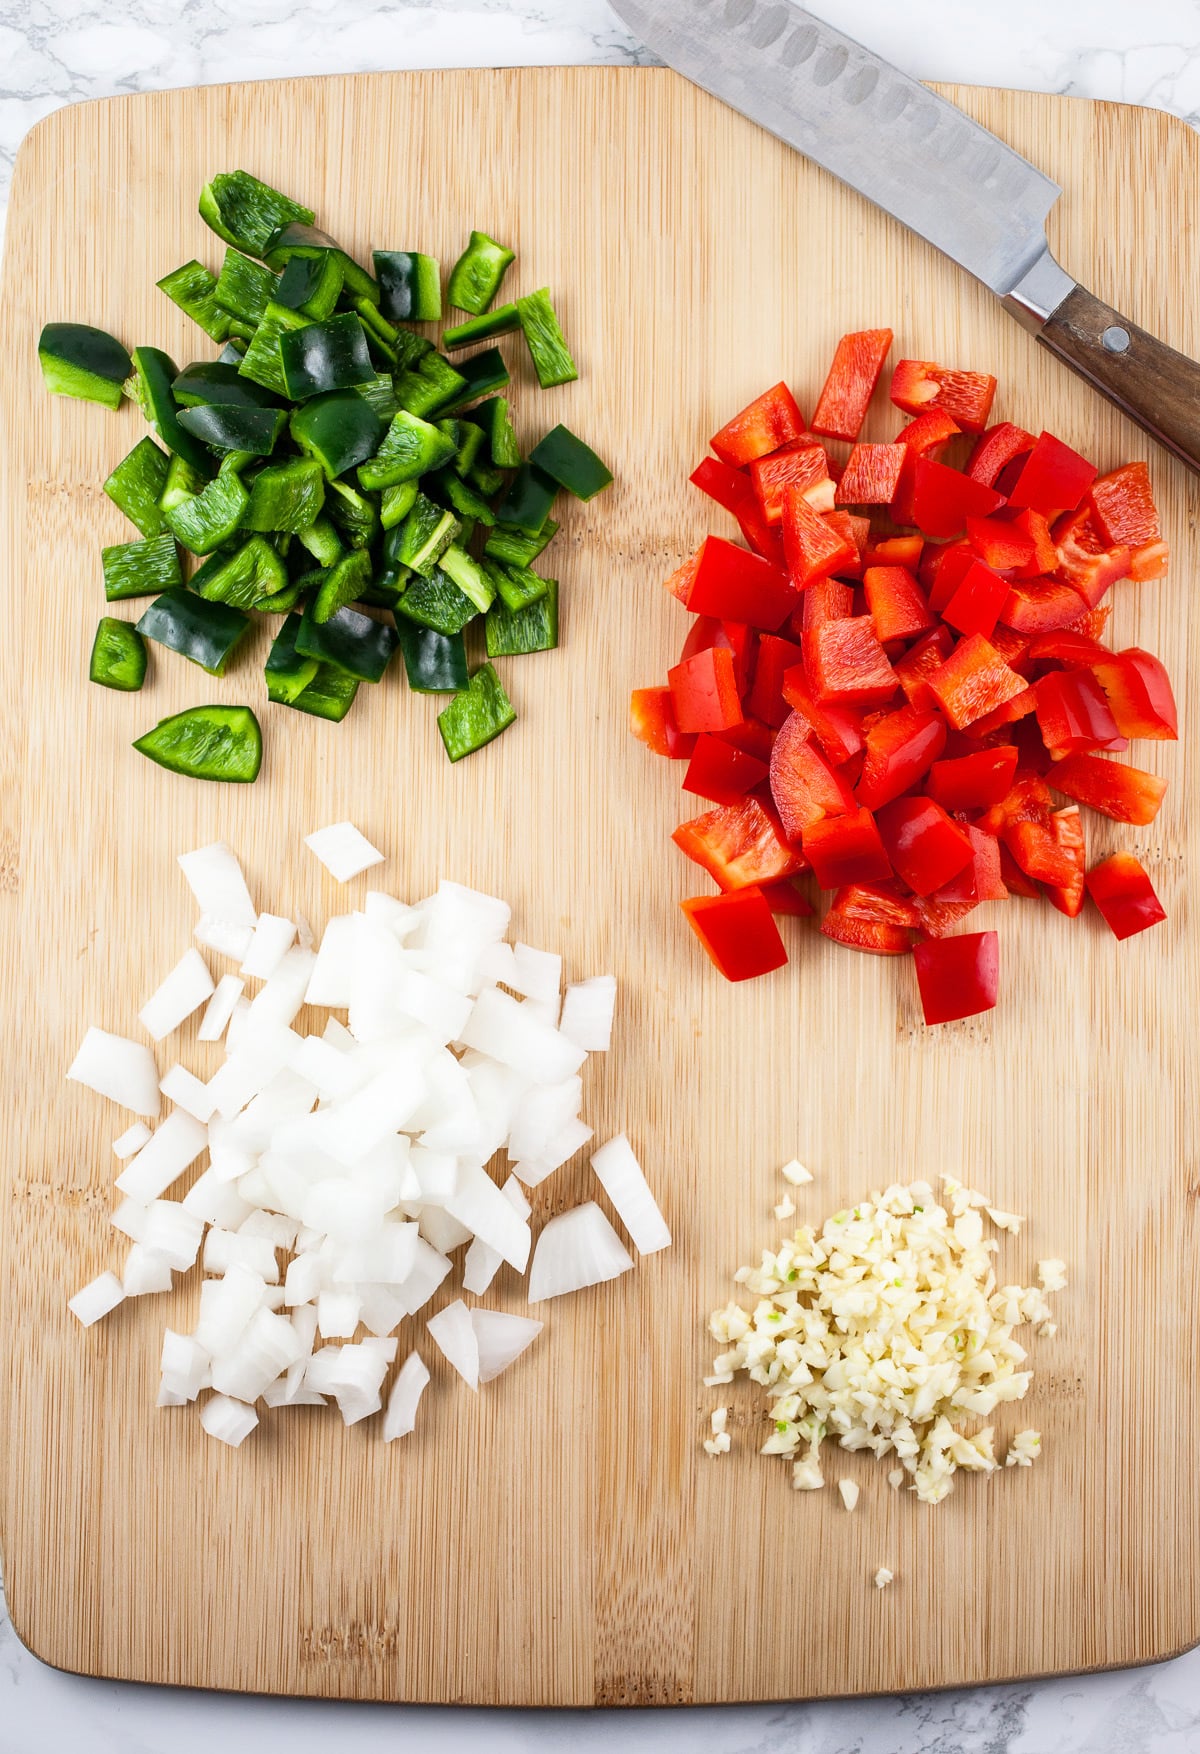 Minced garlic, onions, red bell peppers, and poblano peppers on wooden cutting board with knife.